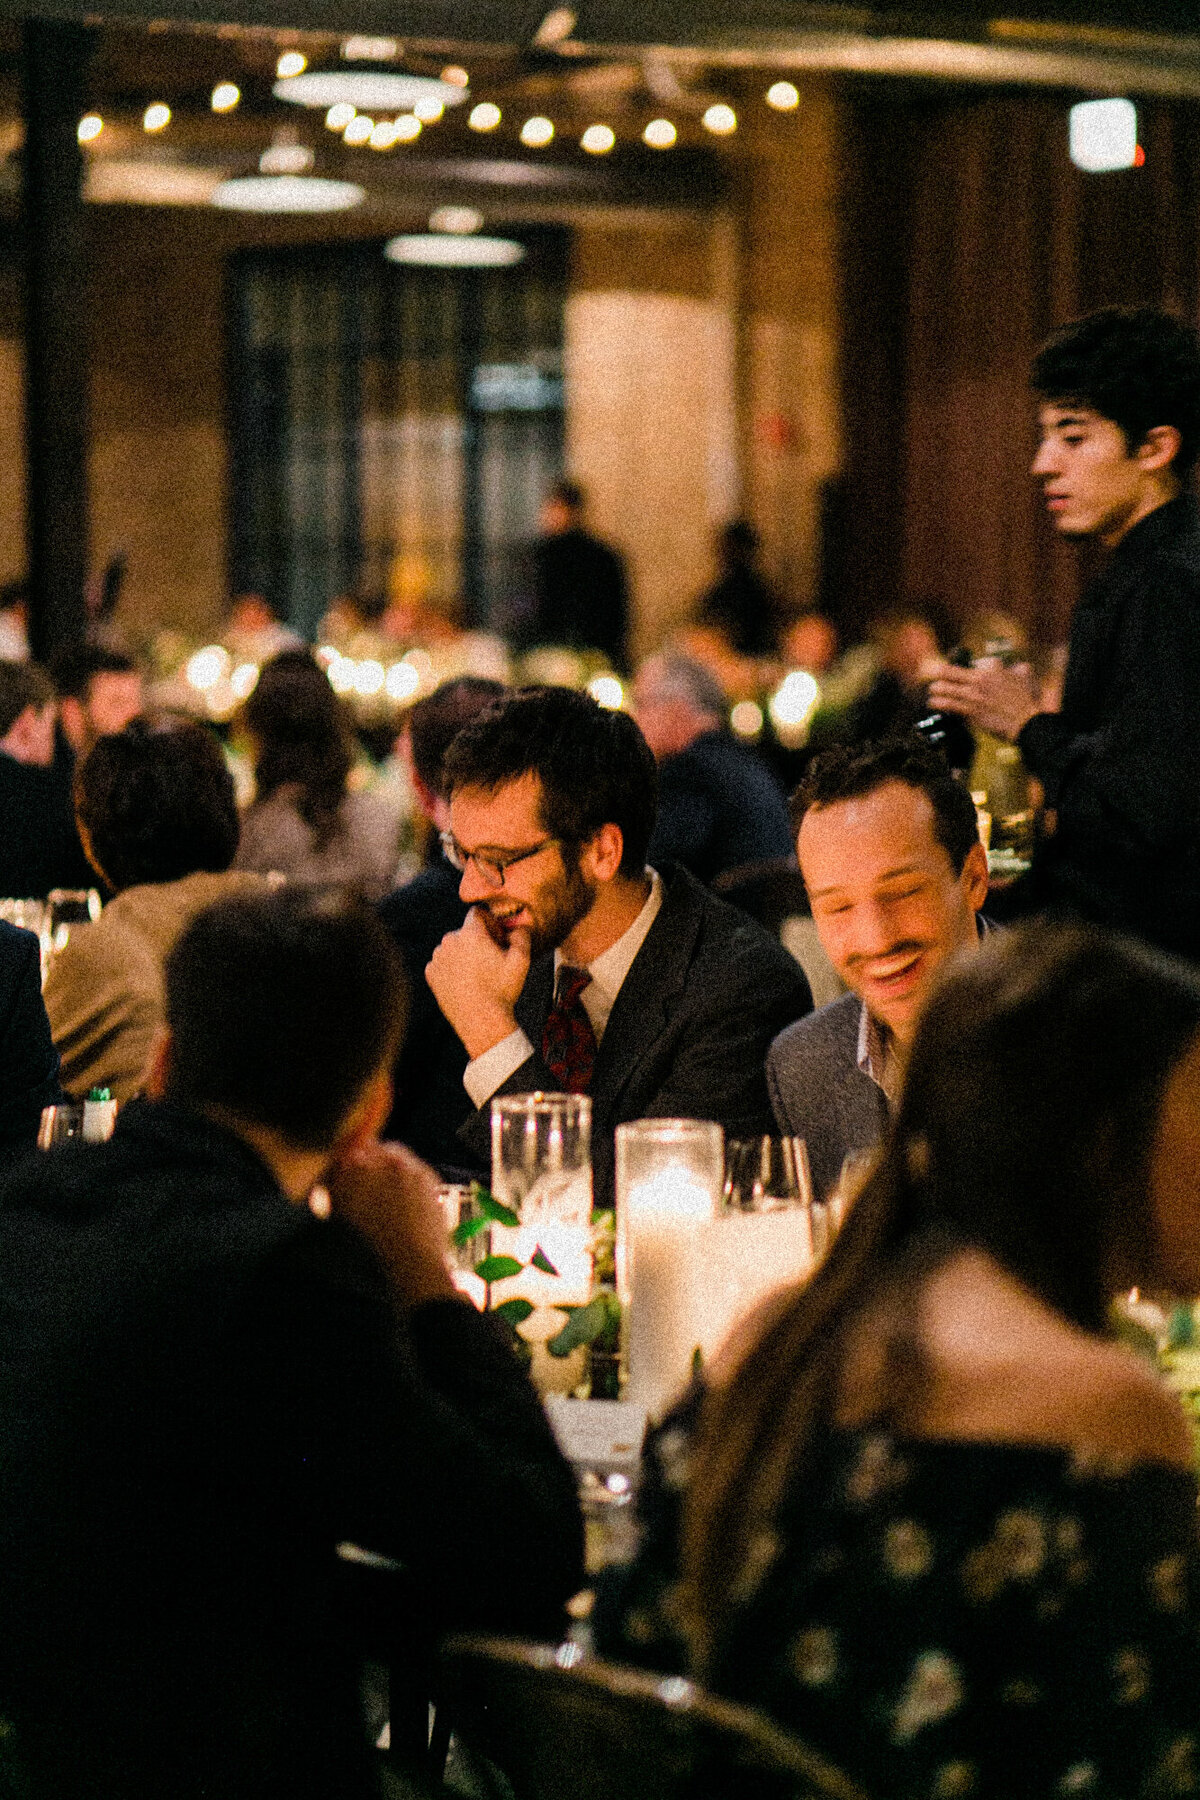 Guests laugh at dinner during a wedding reception in Chicago